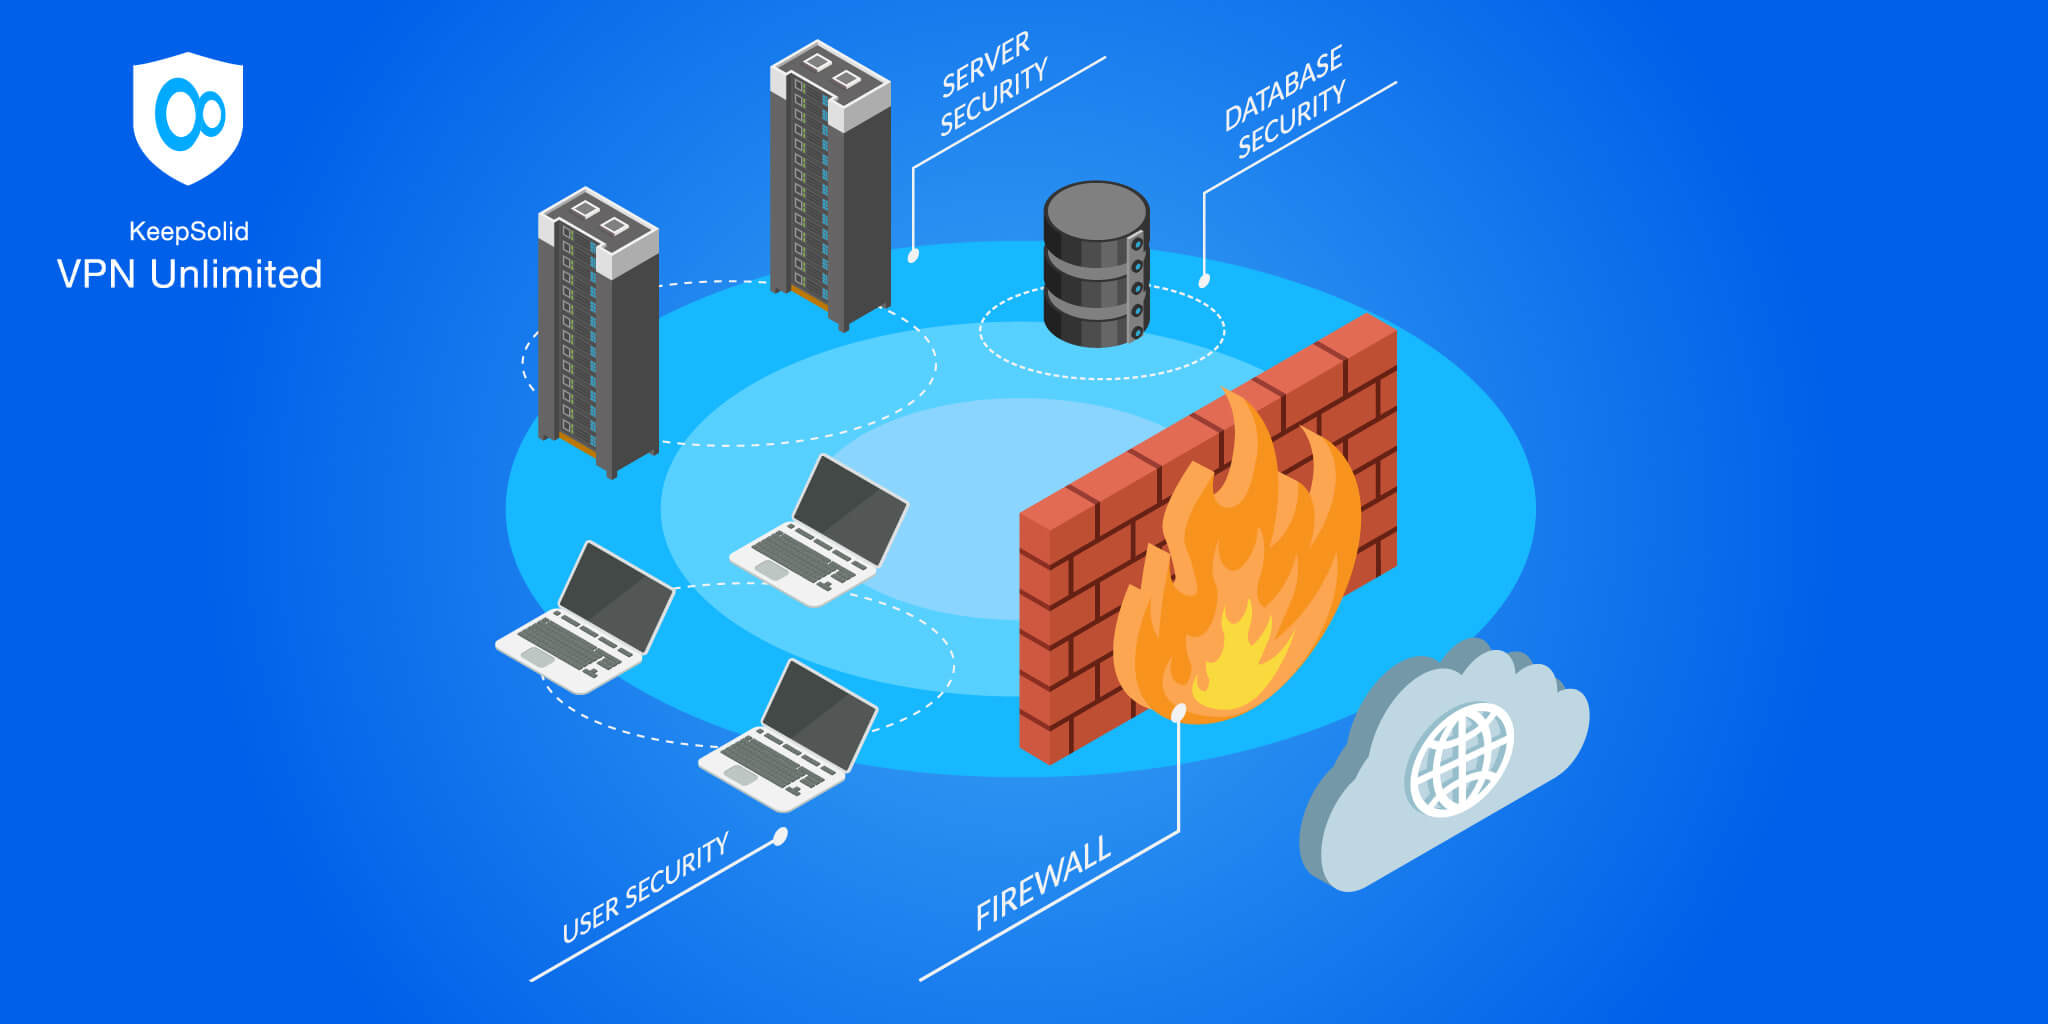  Enterprise Internet security firewall protection (don't forget to add VPN!)